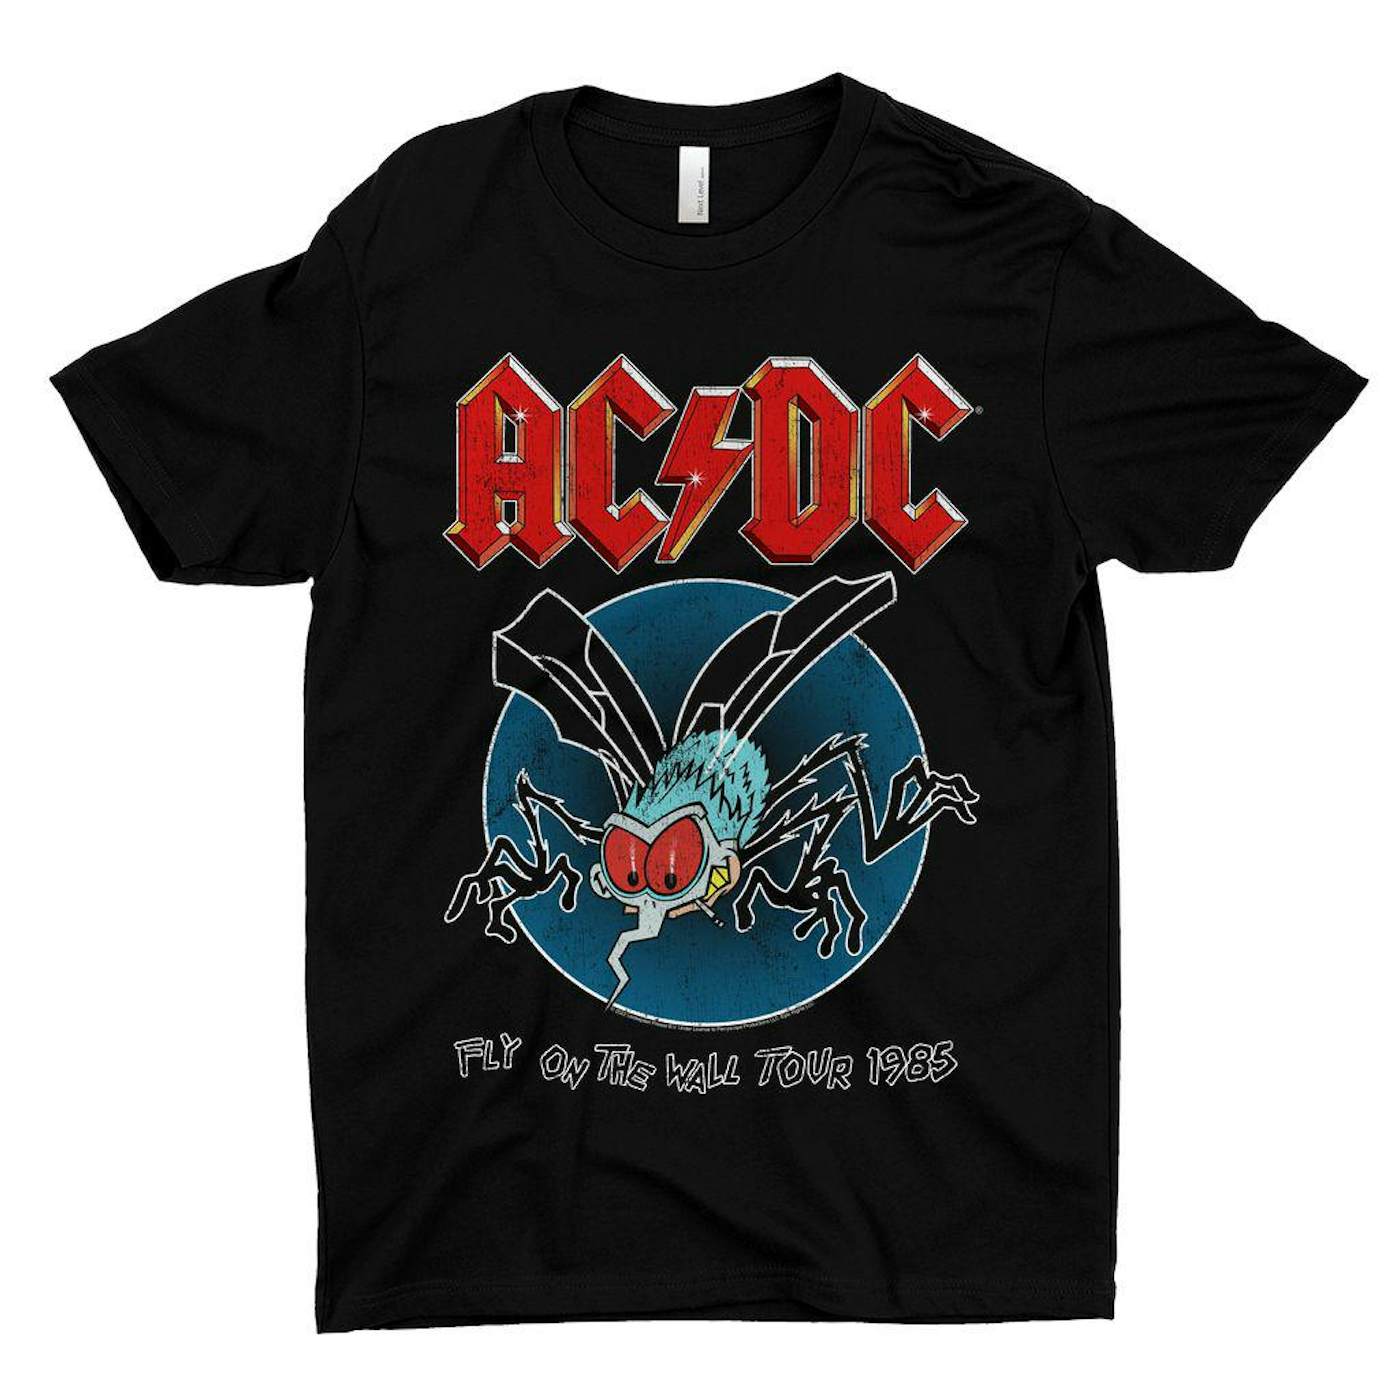 Wall On | 1985 Tour T-Shirt AC/DC Shirt Fly The